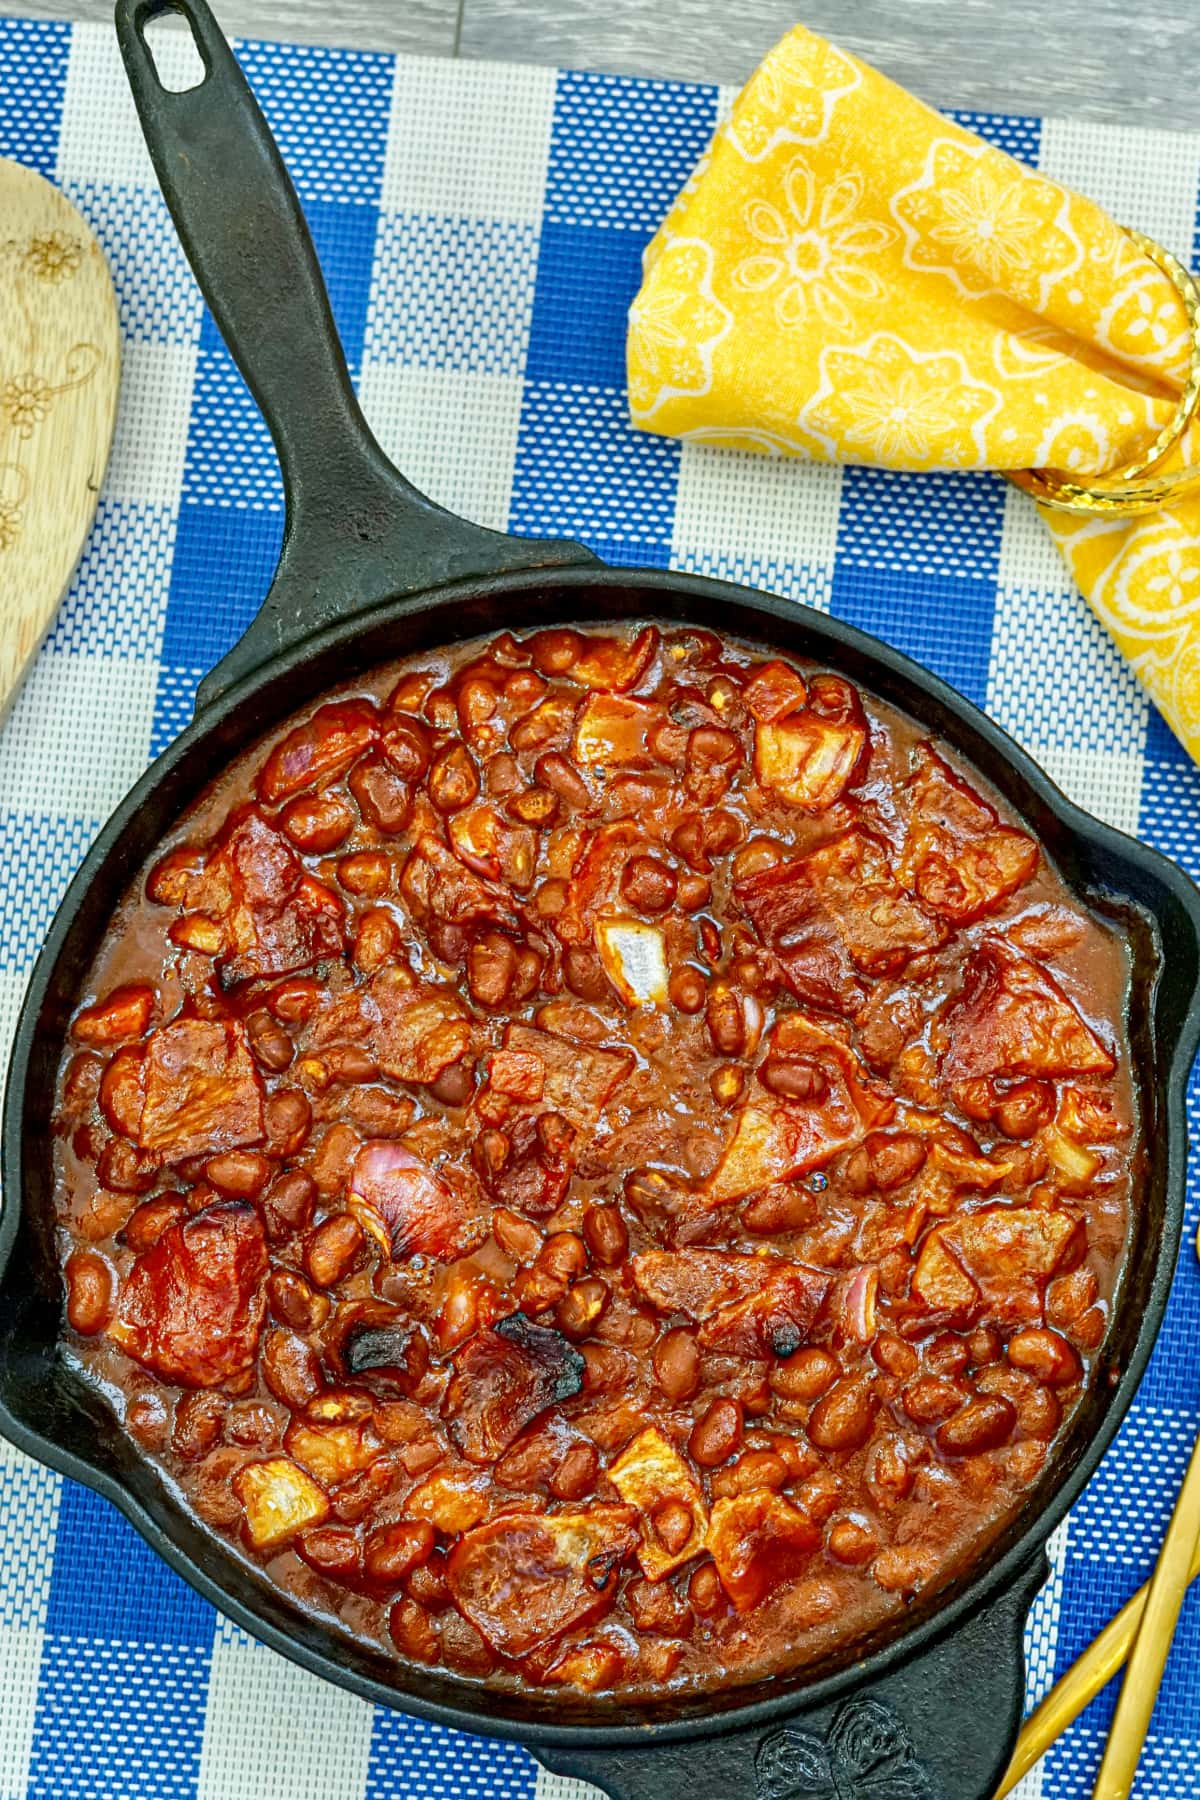 Baked Beans with bacon in skillet